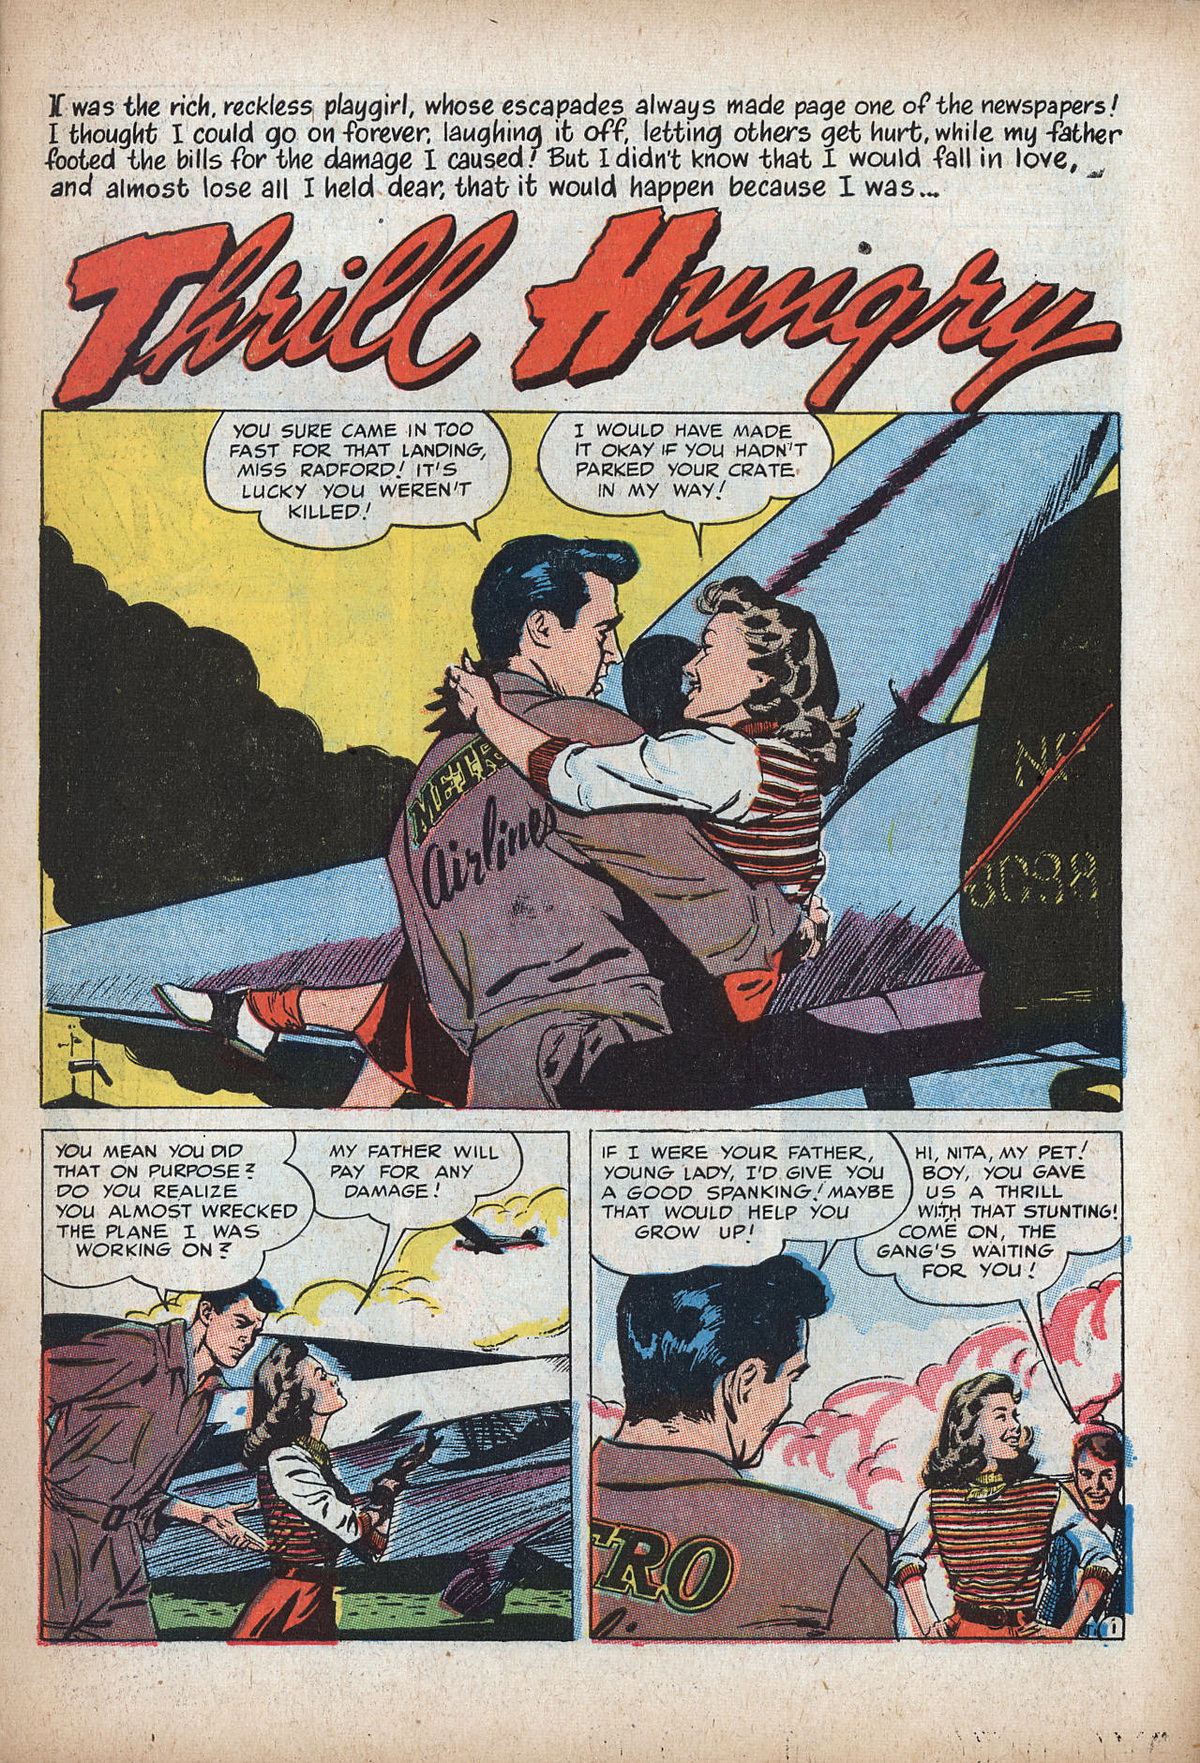 romantic marriage thrill hungry splash page